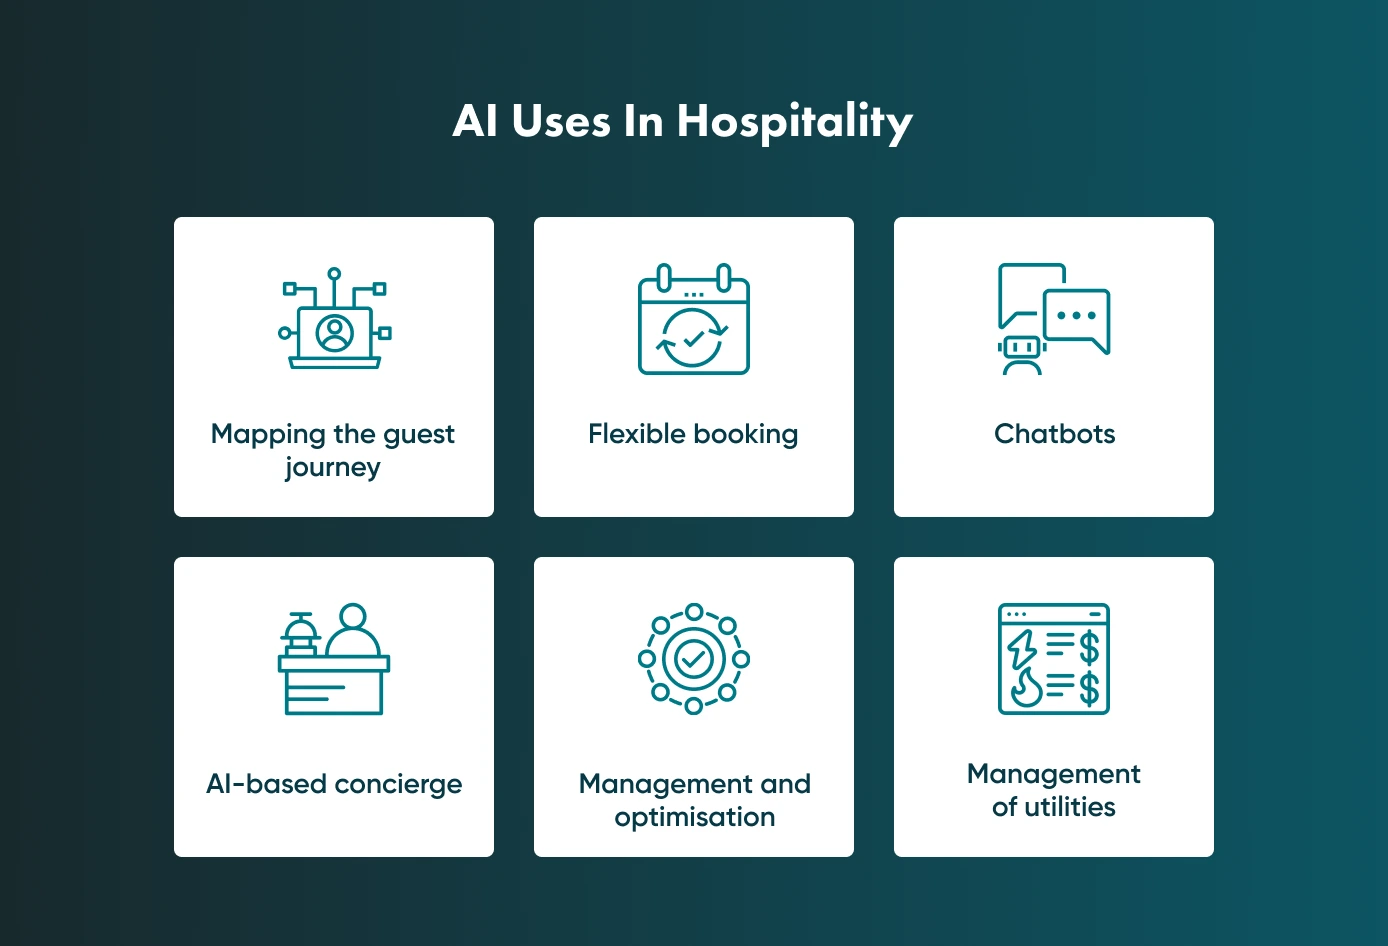 A clearer image of how Artificial Intelligence is influencing the hospitality industry.